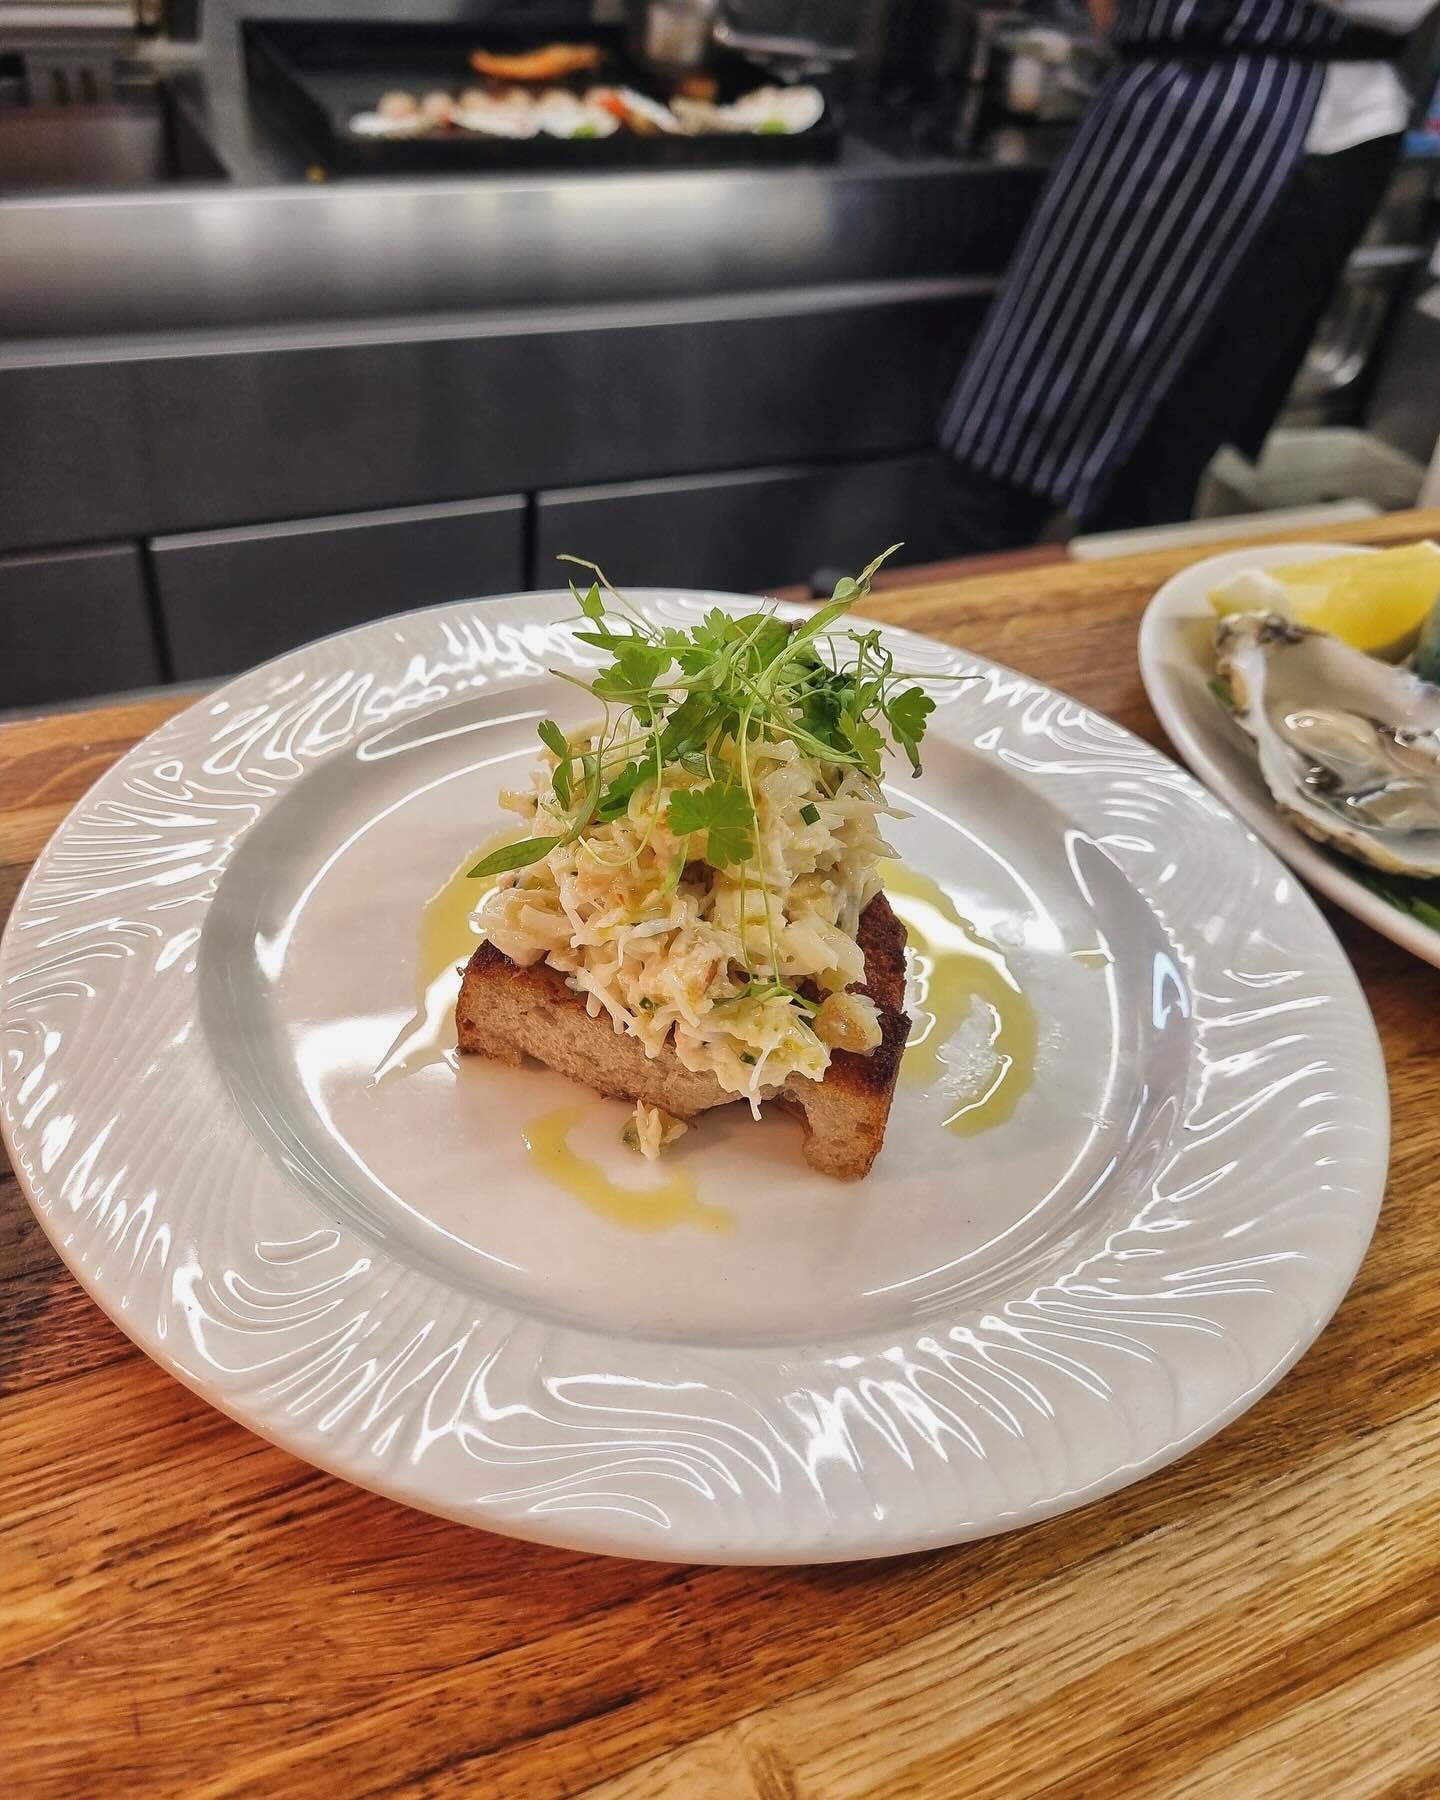 Sunshine and good things this weekend! Big thanks to everyone continuing to keep us so busy ☀️🌊

🦀 The popular return of Dorset crab toast with confit fennel and homemade mayo 
🐟 Whole day boat Cornish plaice and native Dorset lobster on the pass
